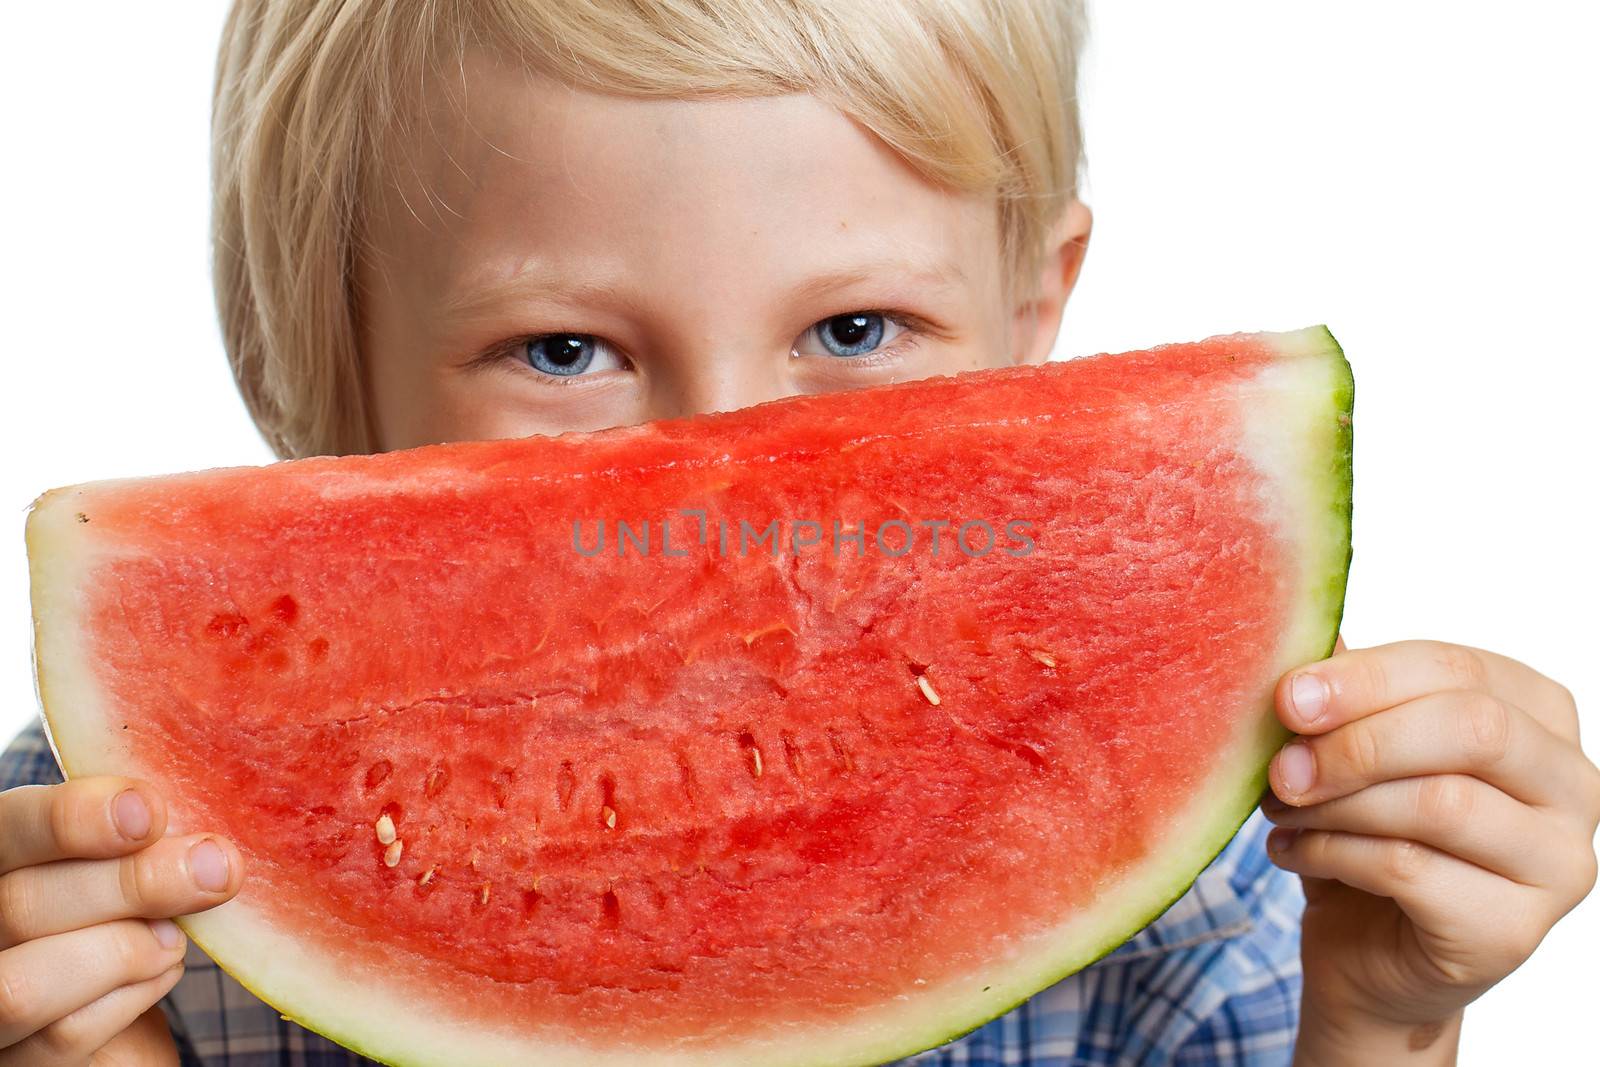 Close-up shot of a cute happy smiling boy peeking over a juicy  slice of watermelon. Isolated on white.